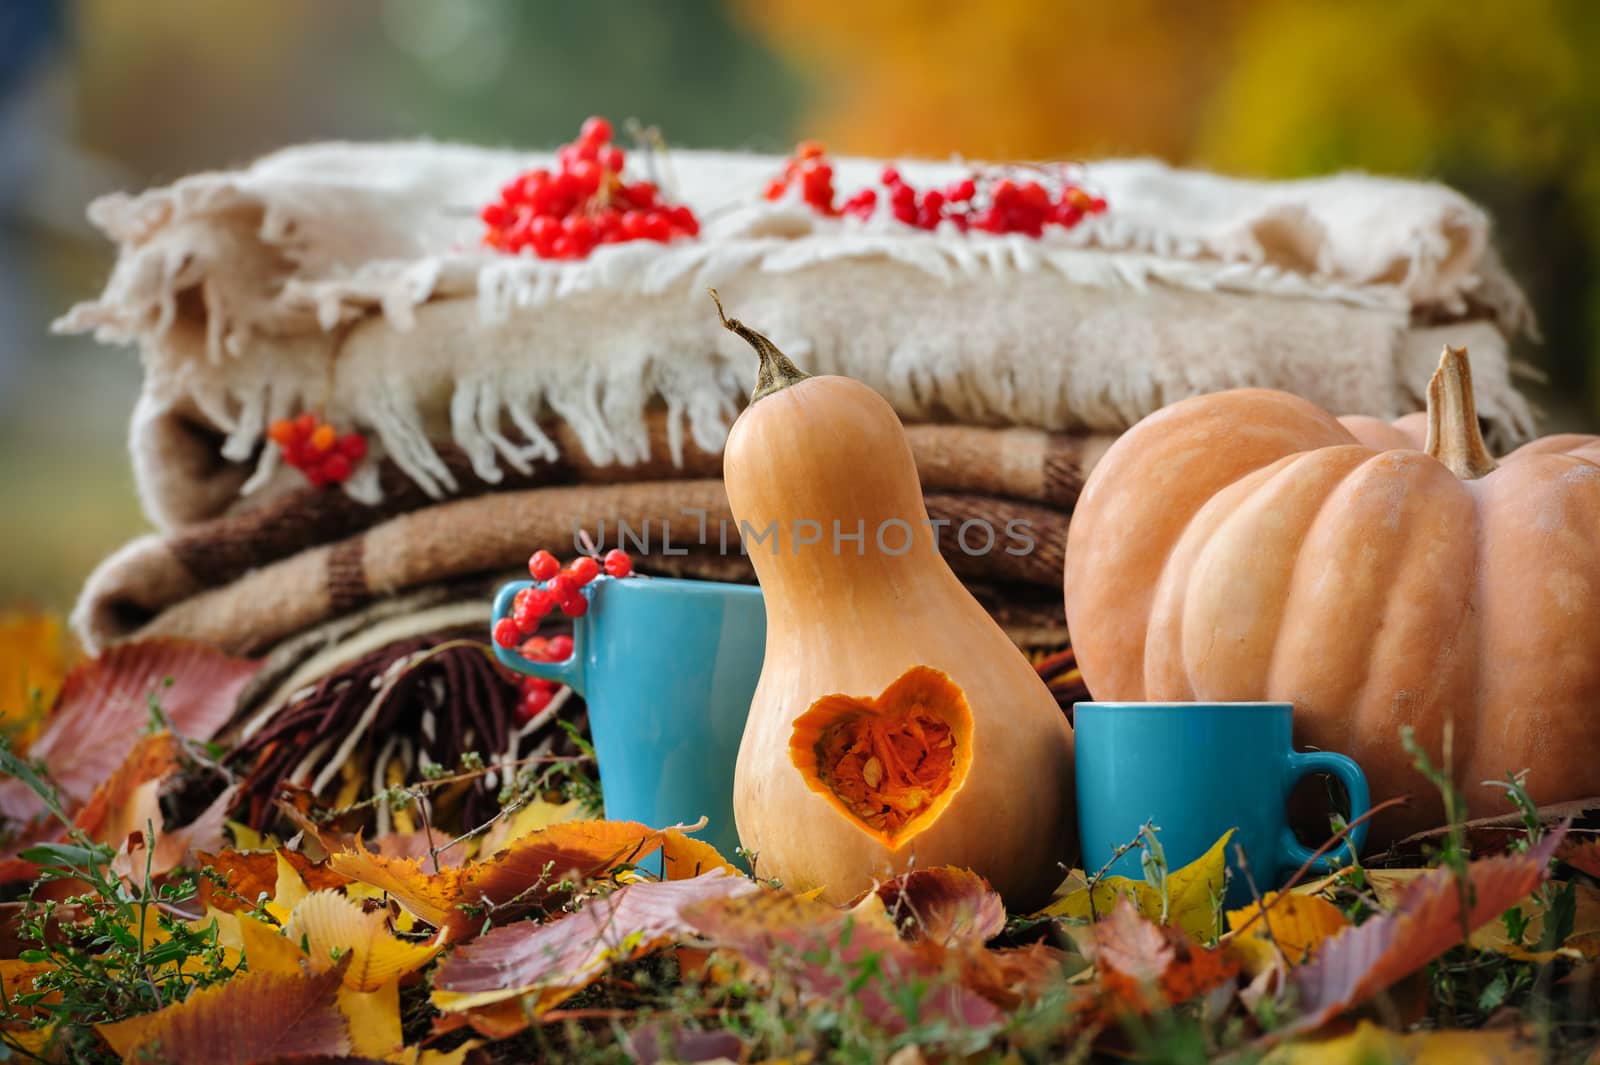 Typical autumn thanksgiving romantic still life with stacked plaids, carved pumpkins, red berries and coffee cups